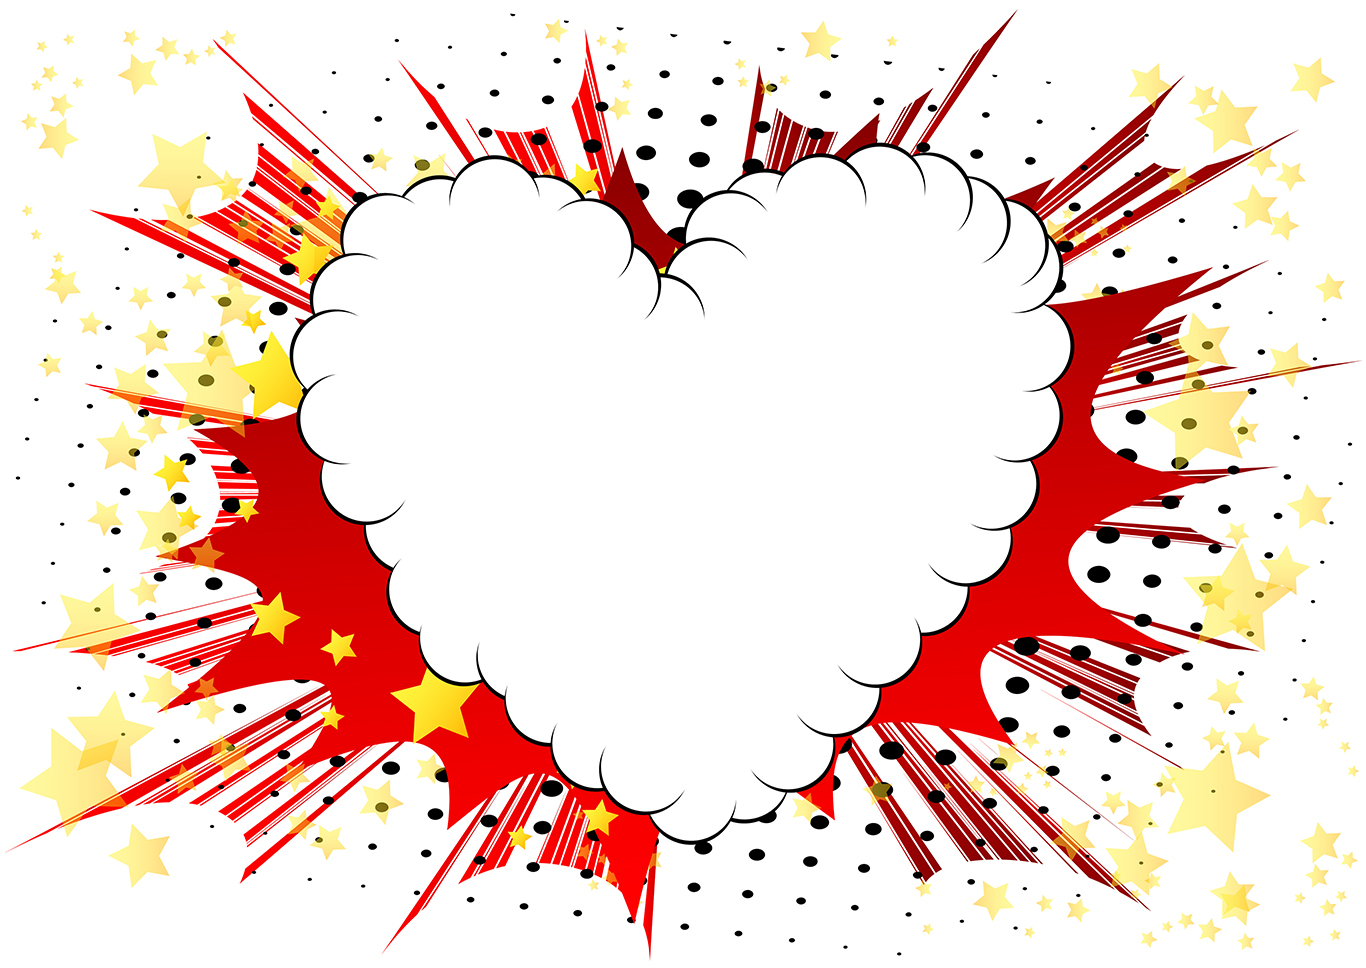 illustrated comic book style heart, abstract love symbol